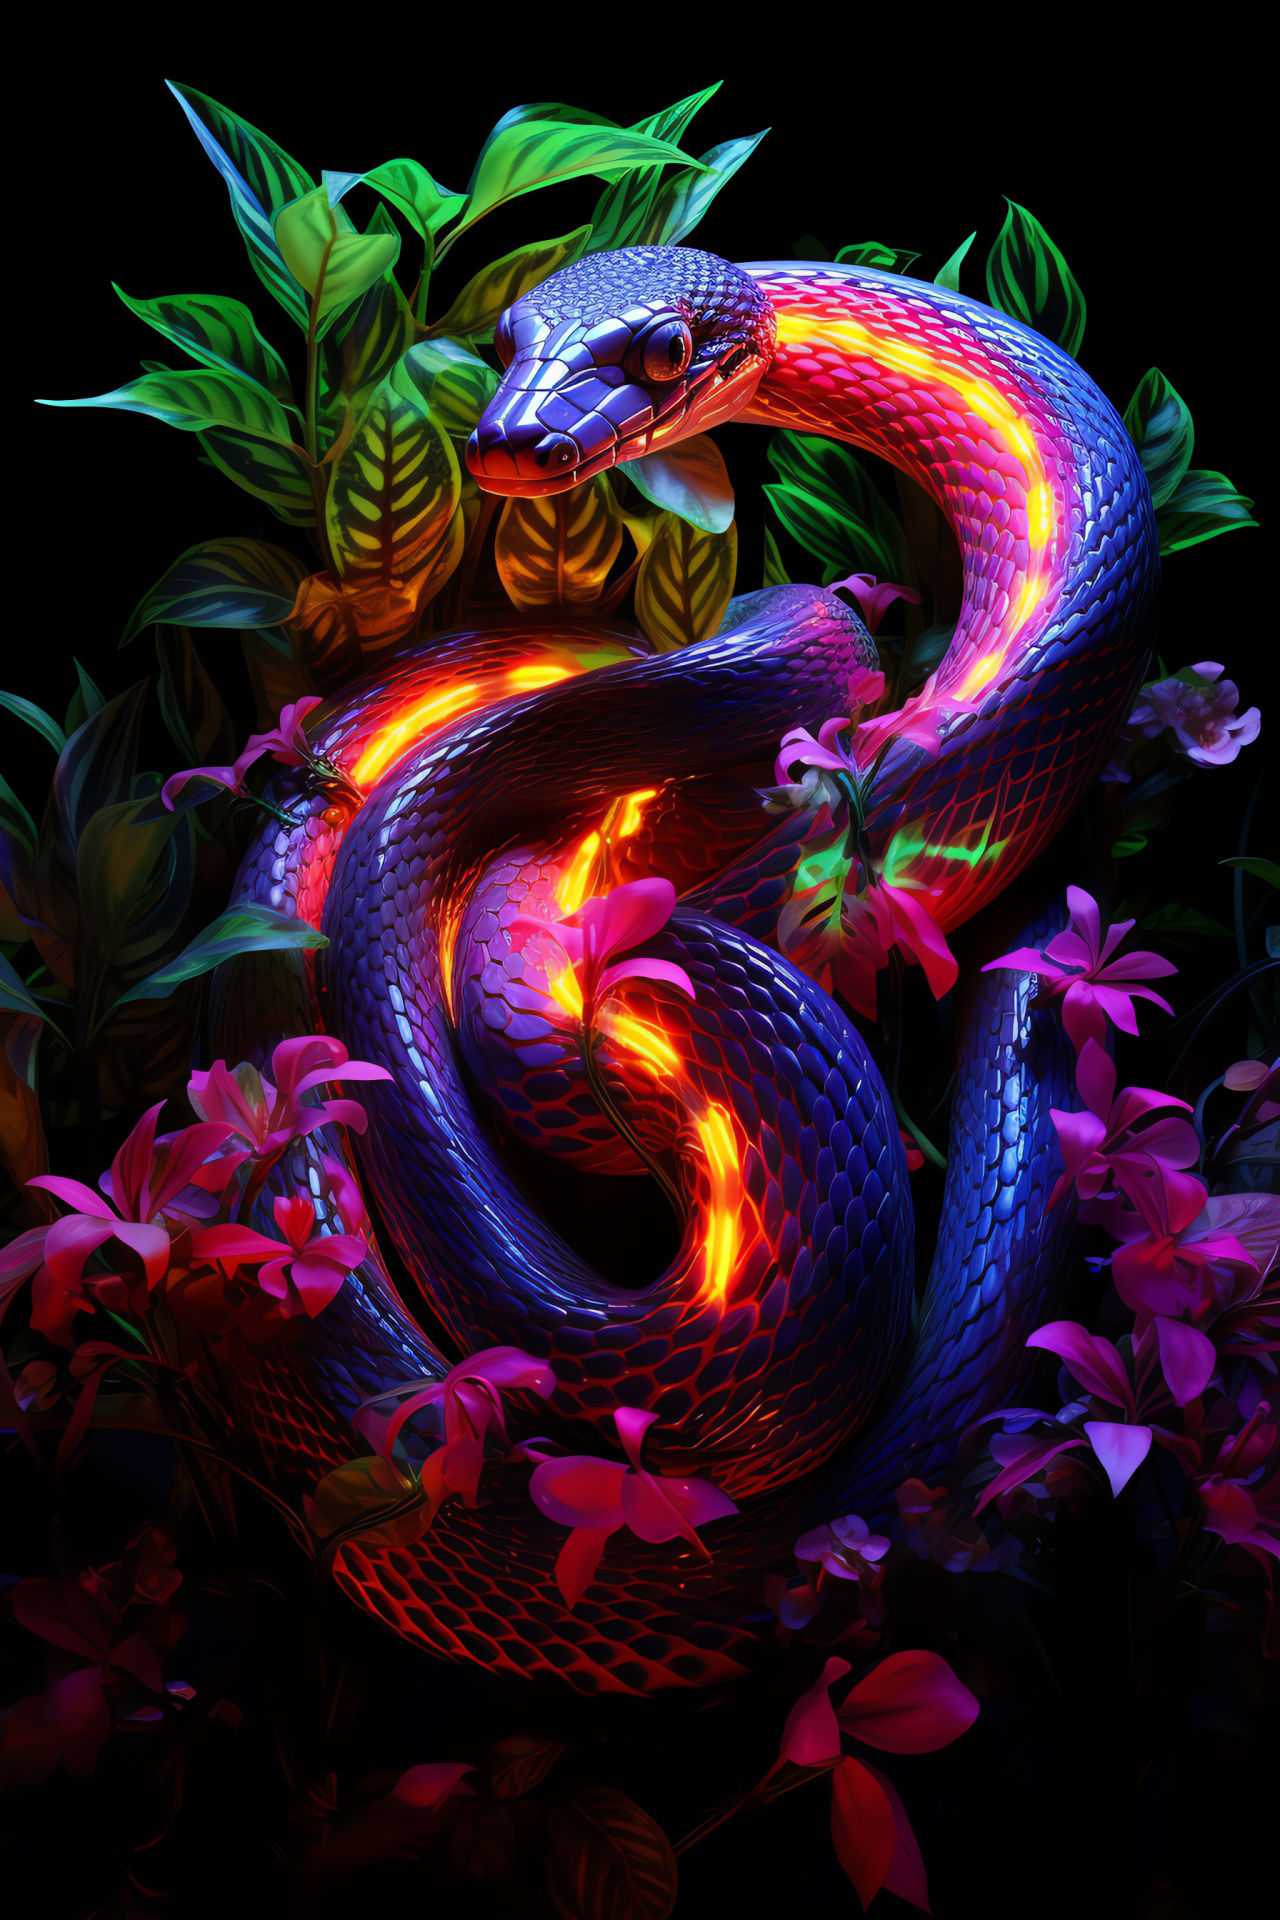 Exotic Neon Snake, Tropical forest habitat, Neon-like vibrance, Multi-colored scales, Untamed nature, HD Phone Wallpaper